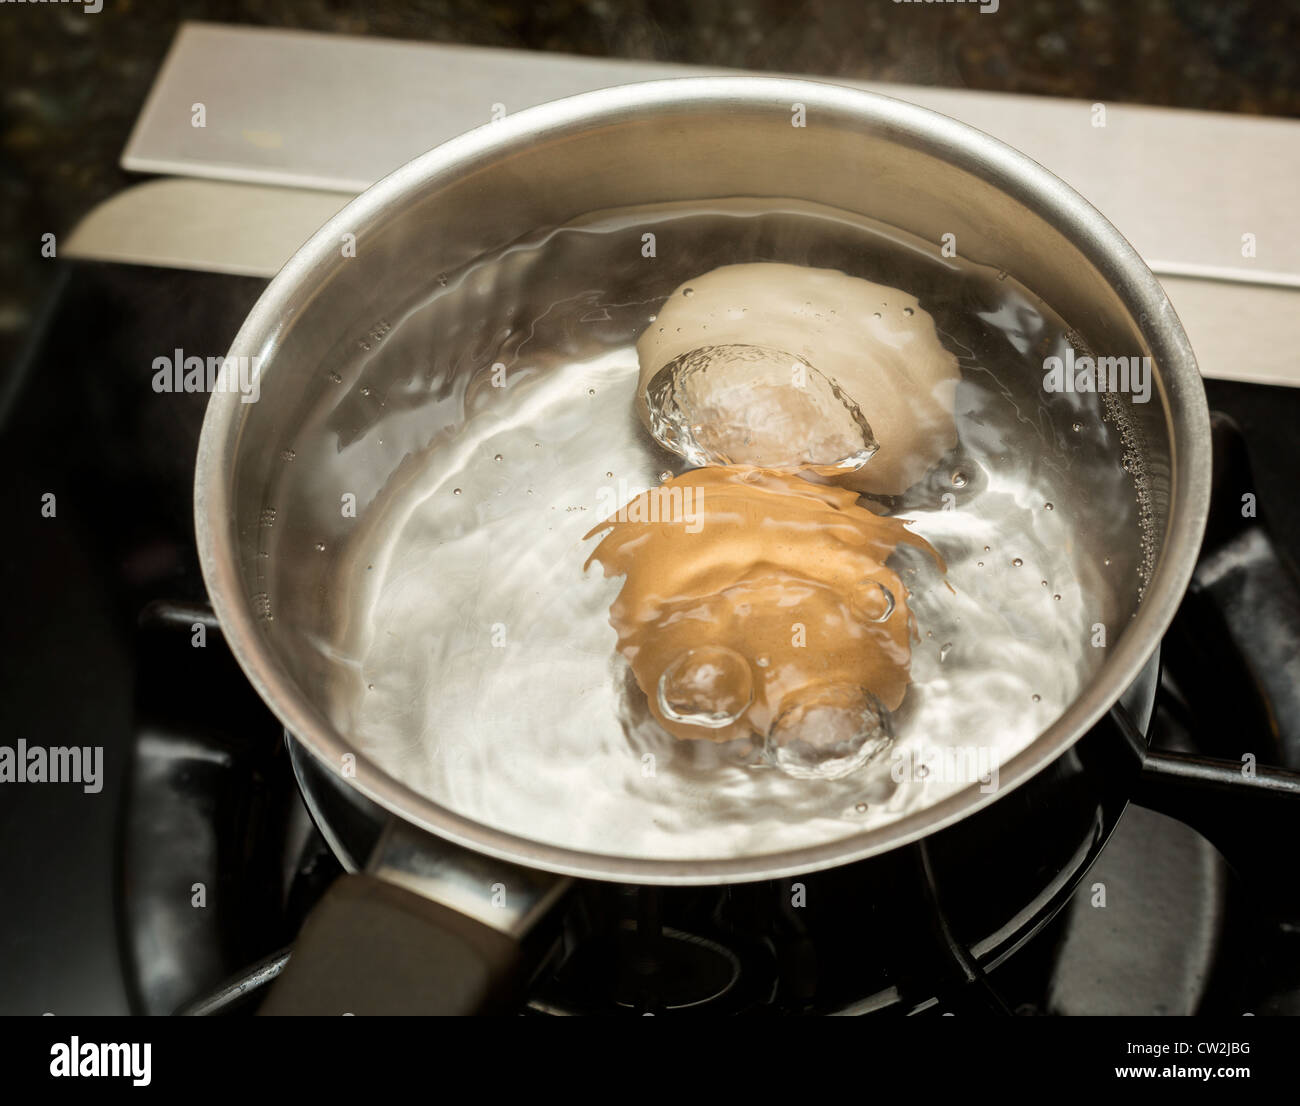 Two eggs in boiling water in stainless steel pan on gas hob Stock Photo